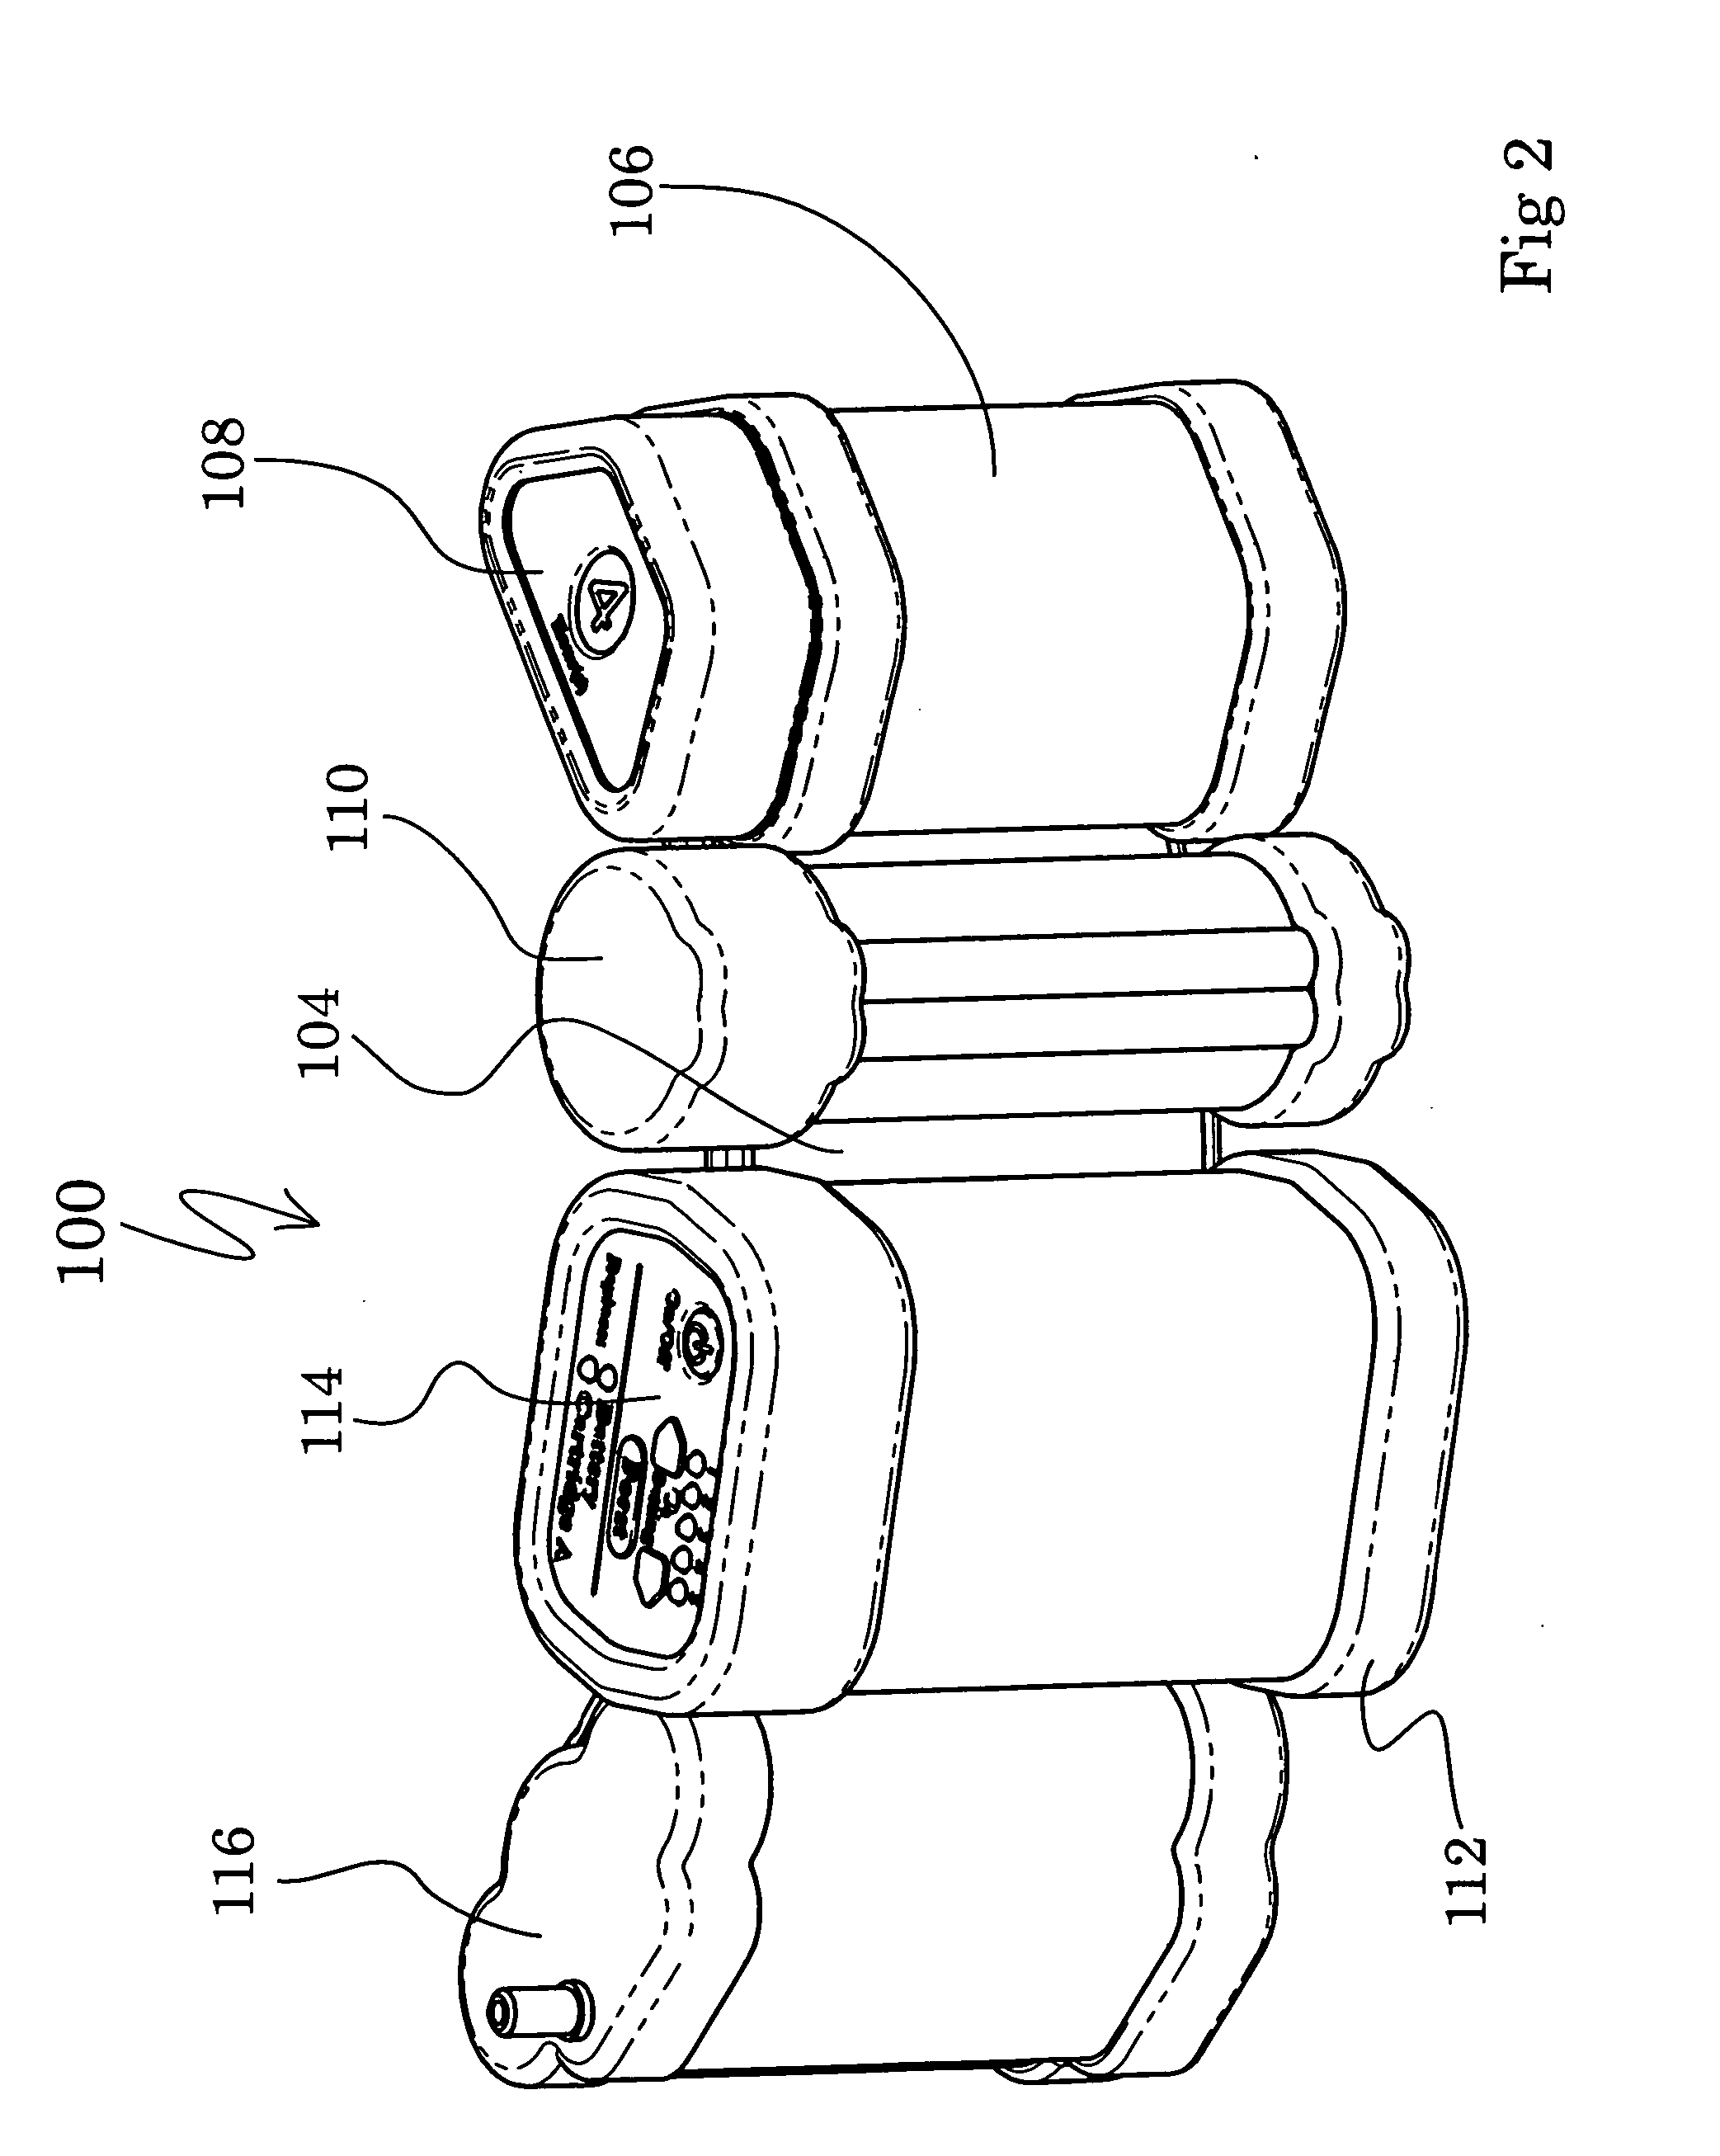 Method and apparatus for controlling the purity of oxygen produced by an oxygen concentrator